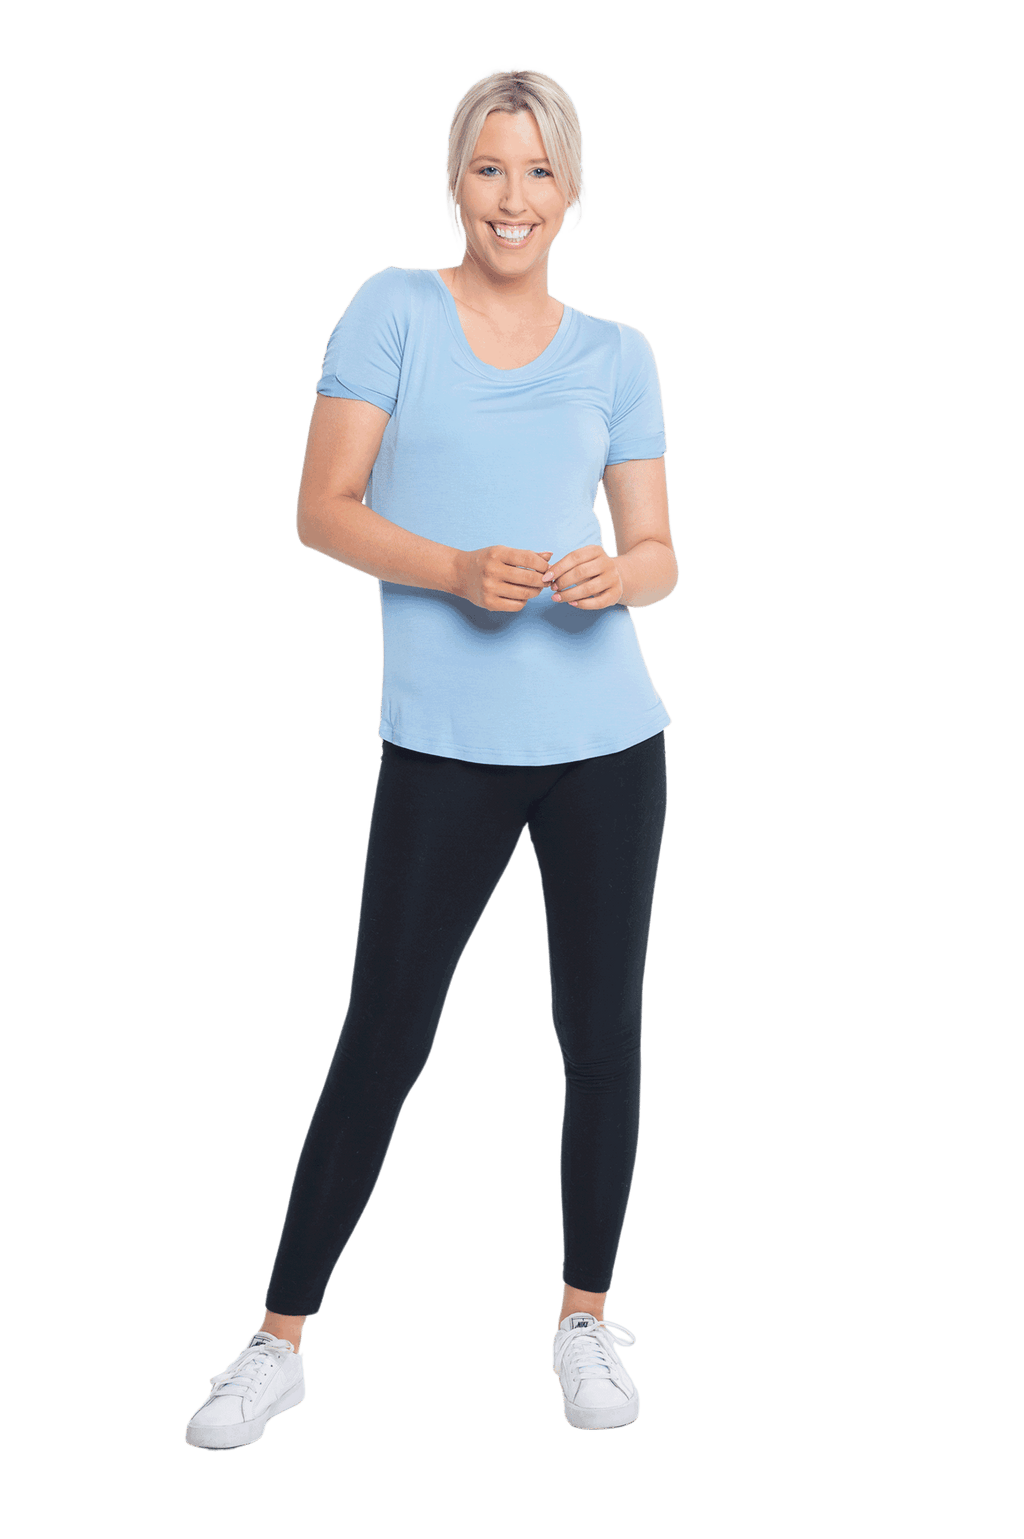 Petite model facing the camera wearing light blue short sleeved tee, featuring rounded neckline, and scooped hem. Stevie available in sizes 6-18